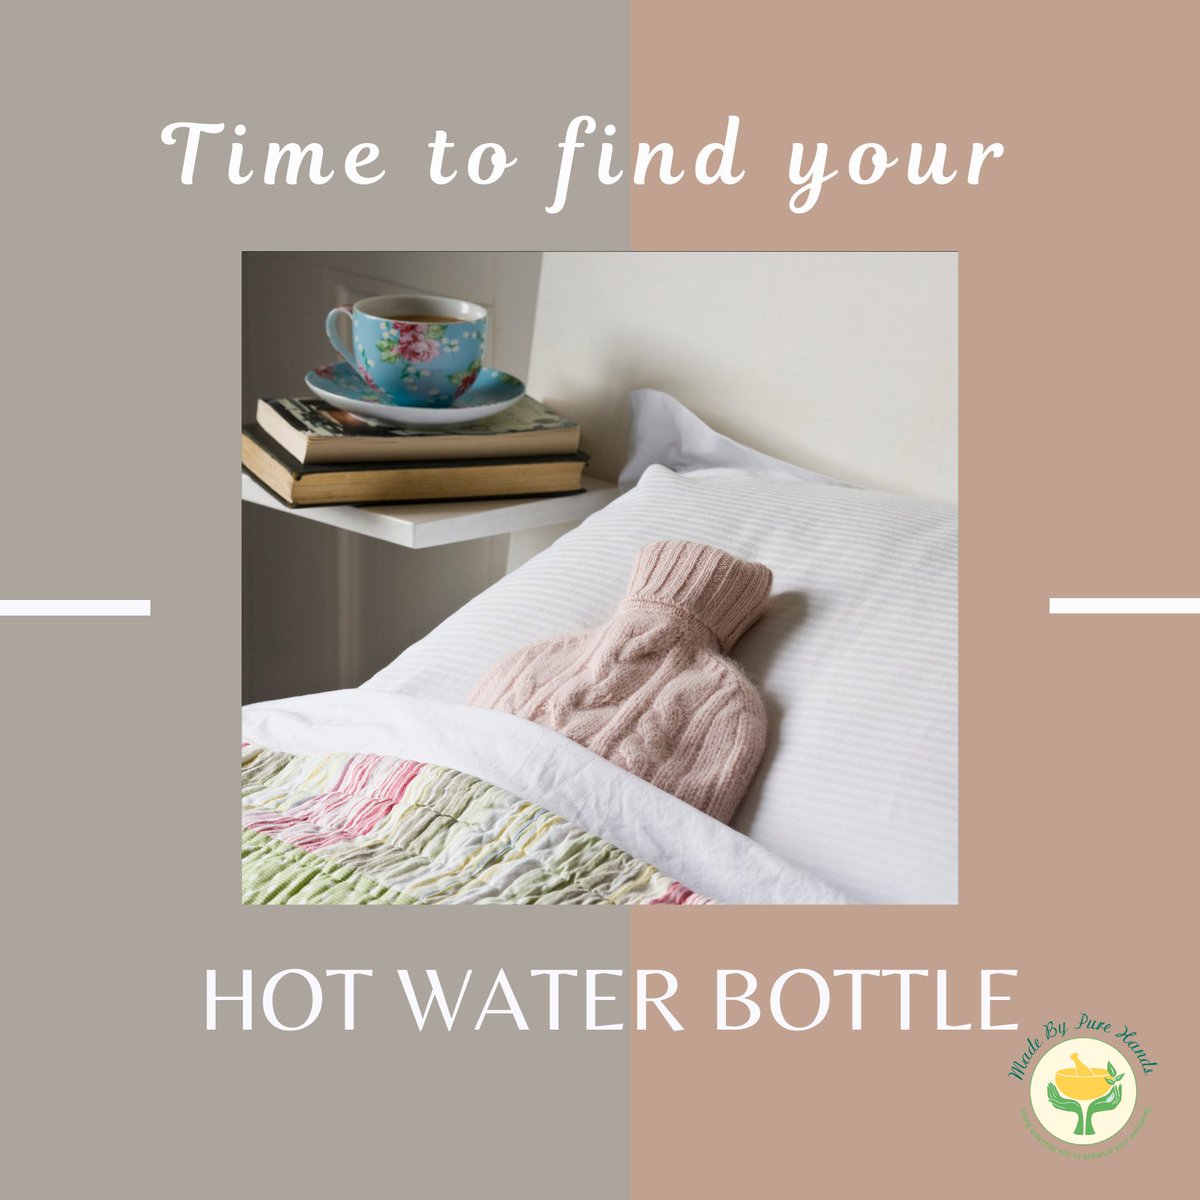 When you have aches, make heat your best friend.  Providing you have no swelling.  
#mbphtip If you work from home, use one to help you sit upright at your desk/table.

#hotwaterbottleseason #musclepainrelief #easeaches #showmusclessomelove #Ilovemassage #whenthetemperaturedrops